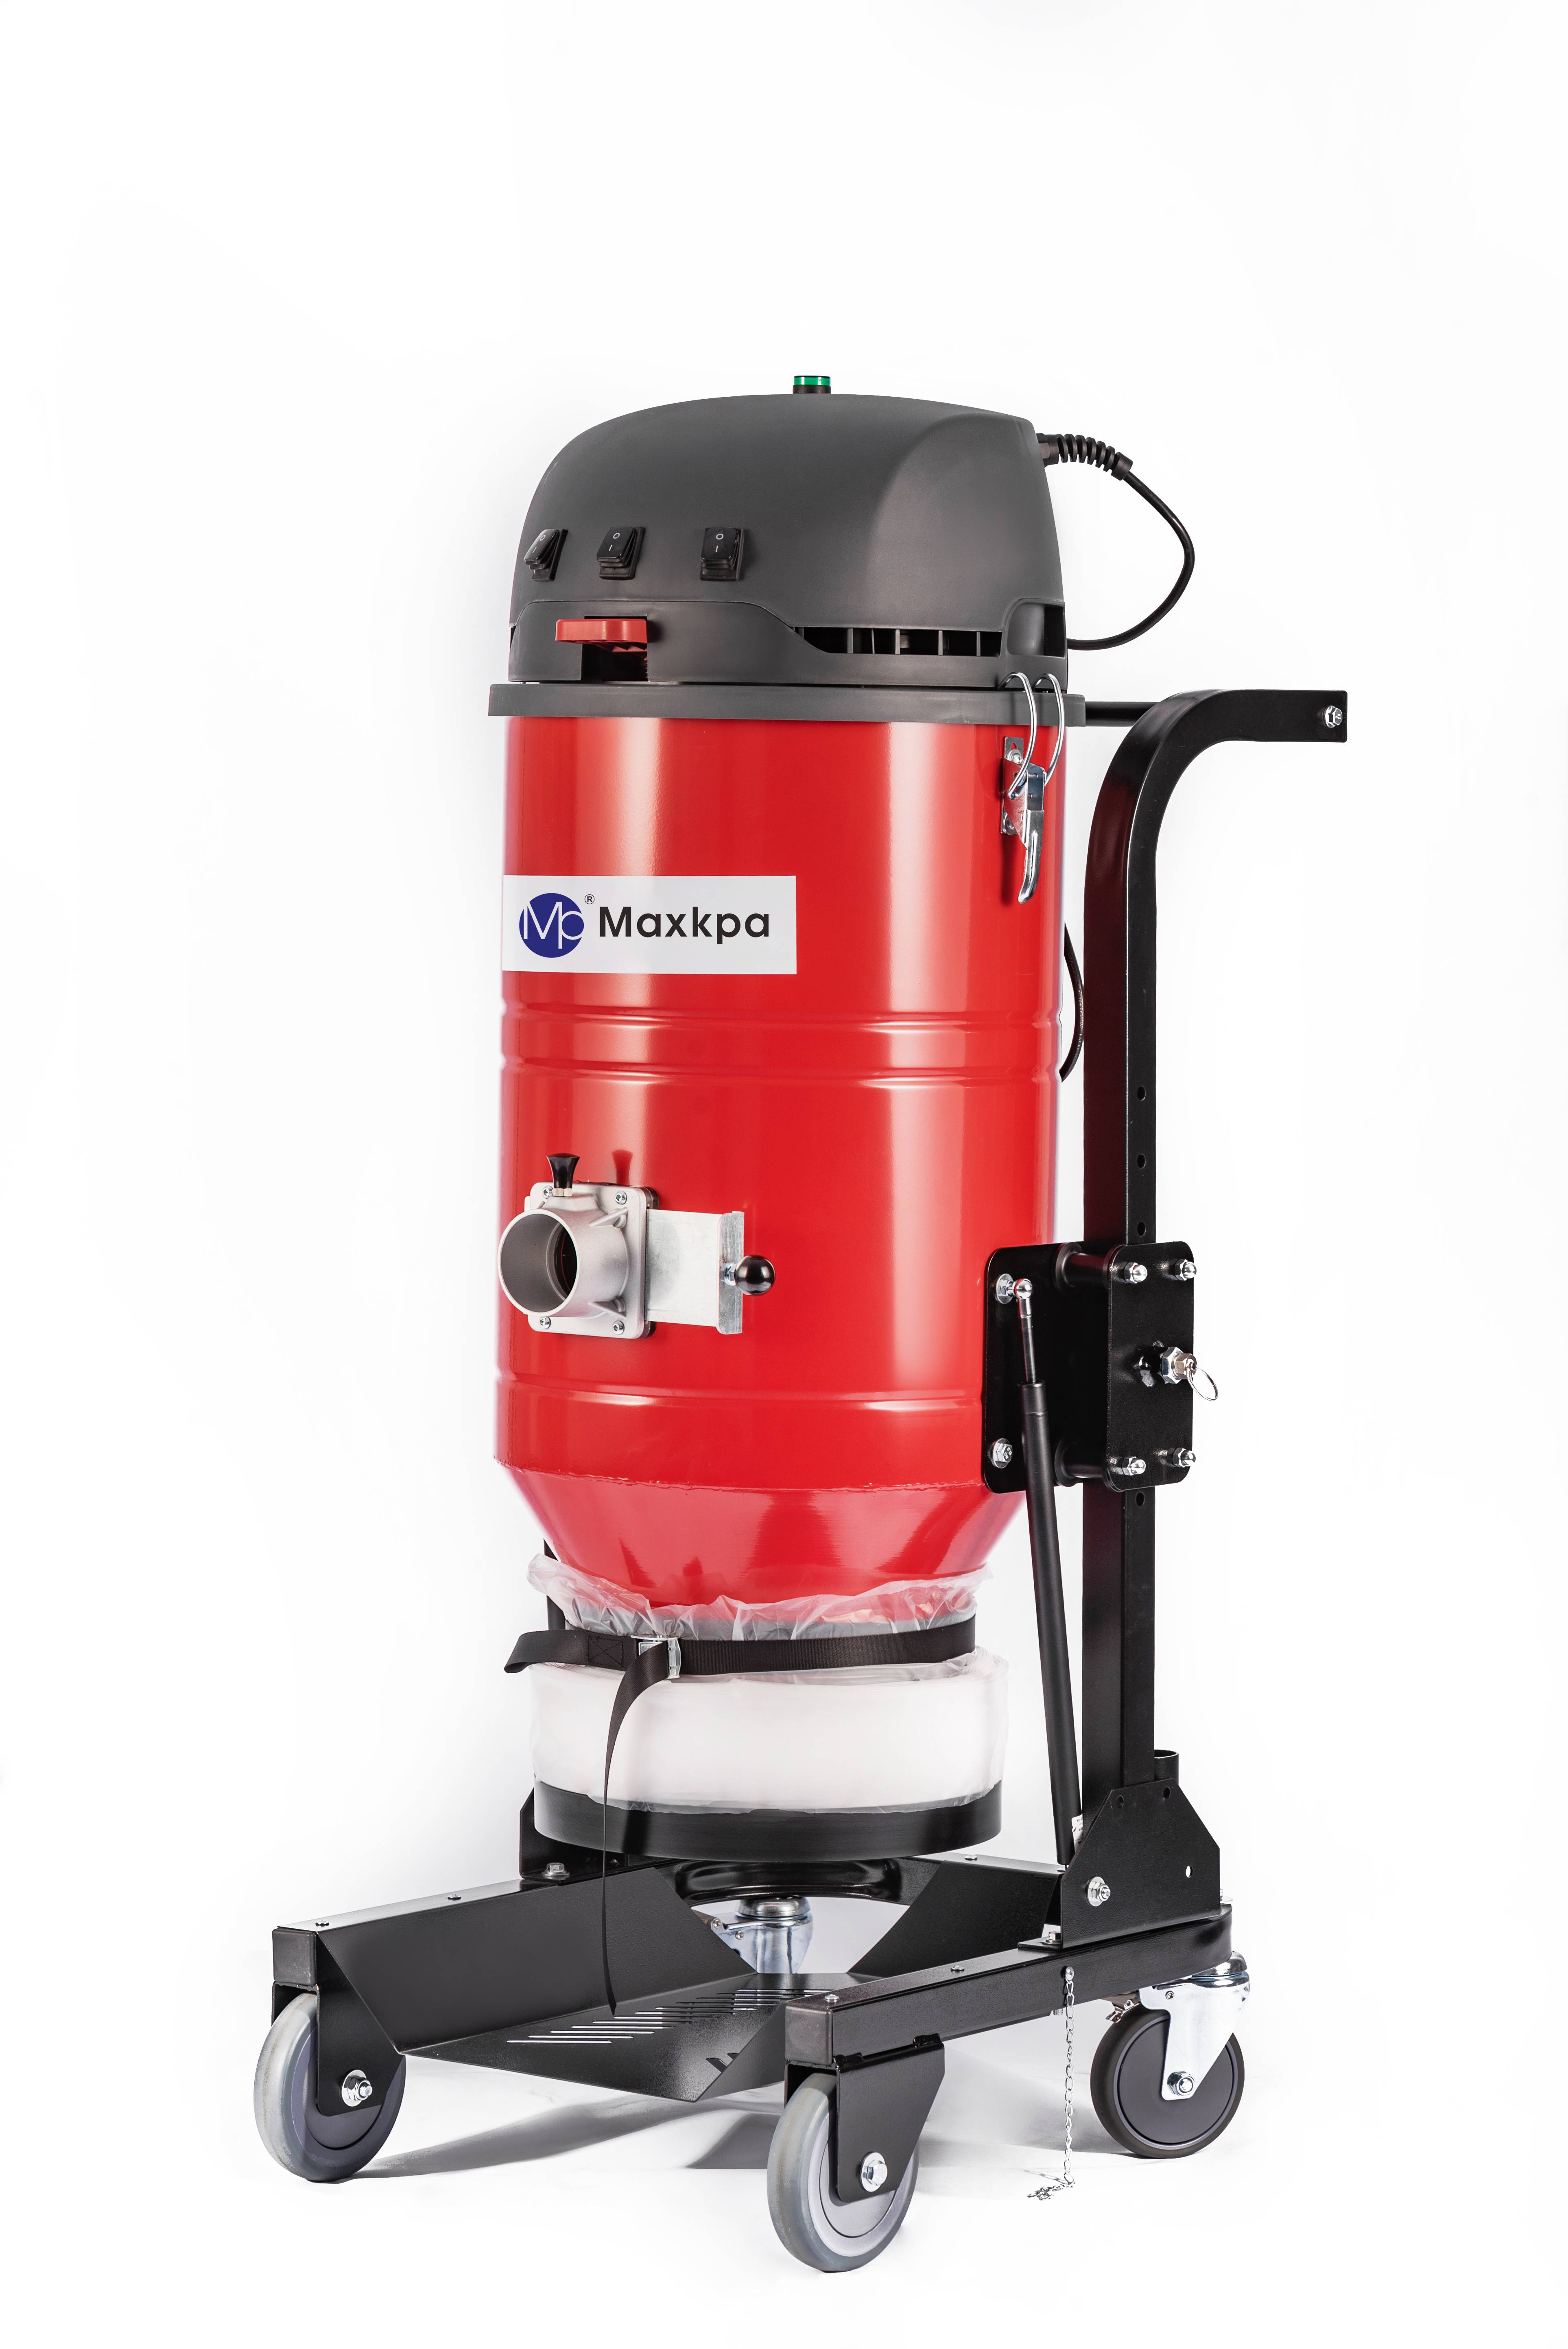 Industrial Vacuum Cleaner: The New Must-Have Tool for Cleaning Factories